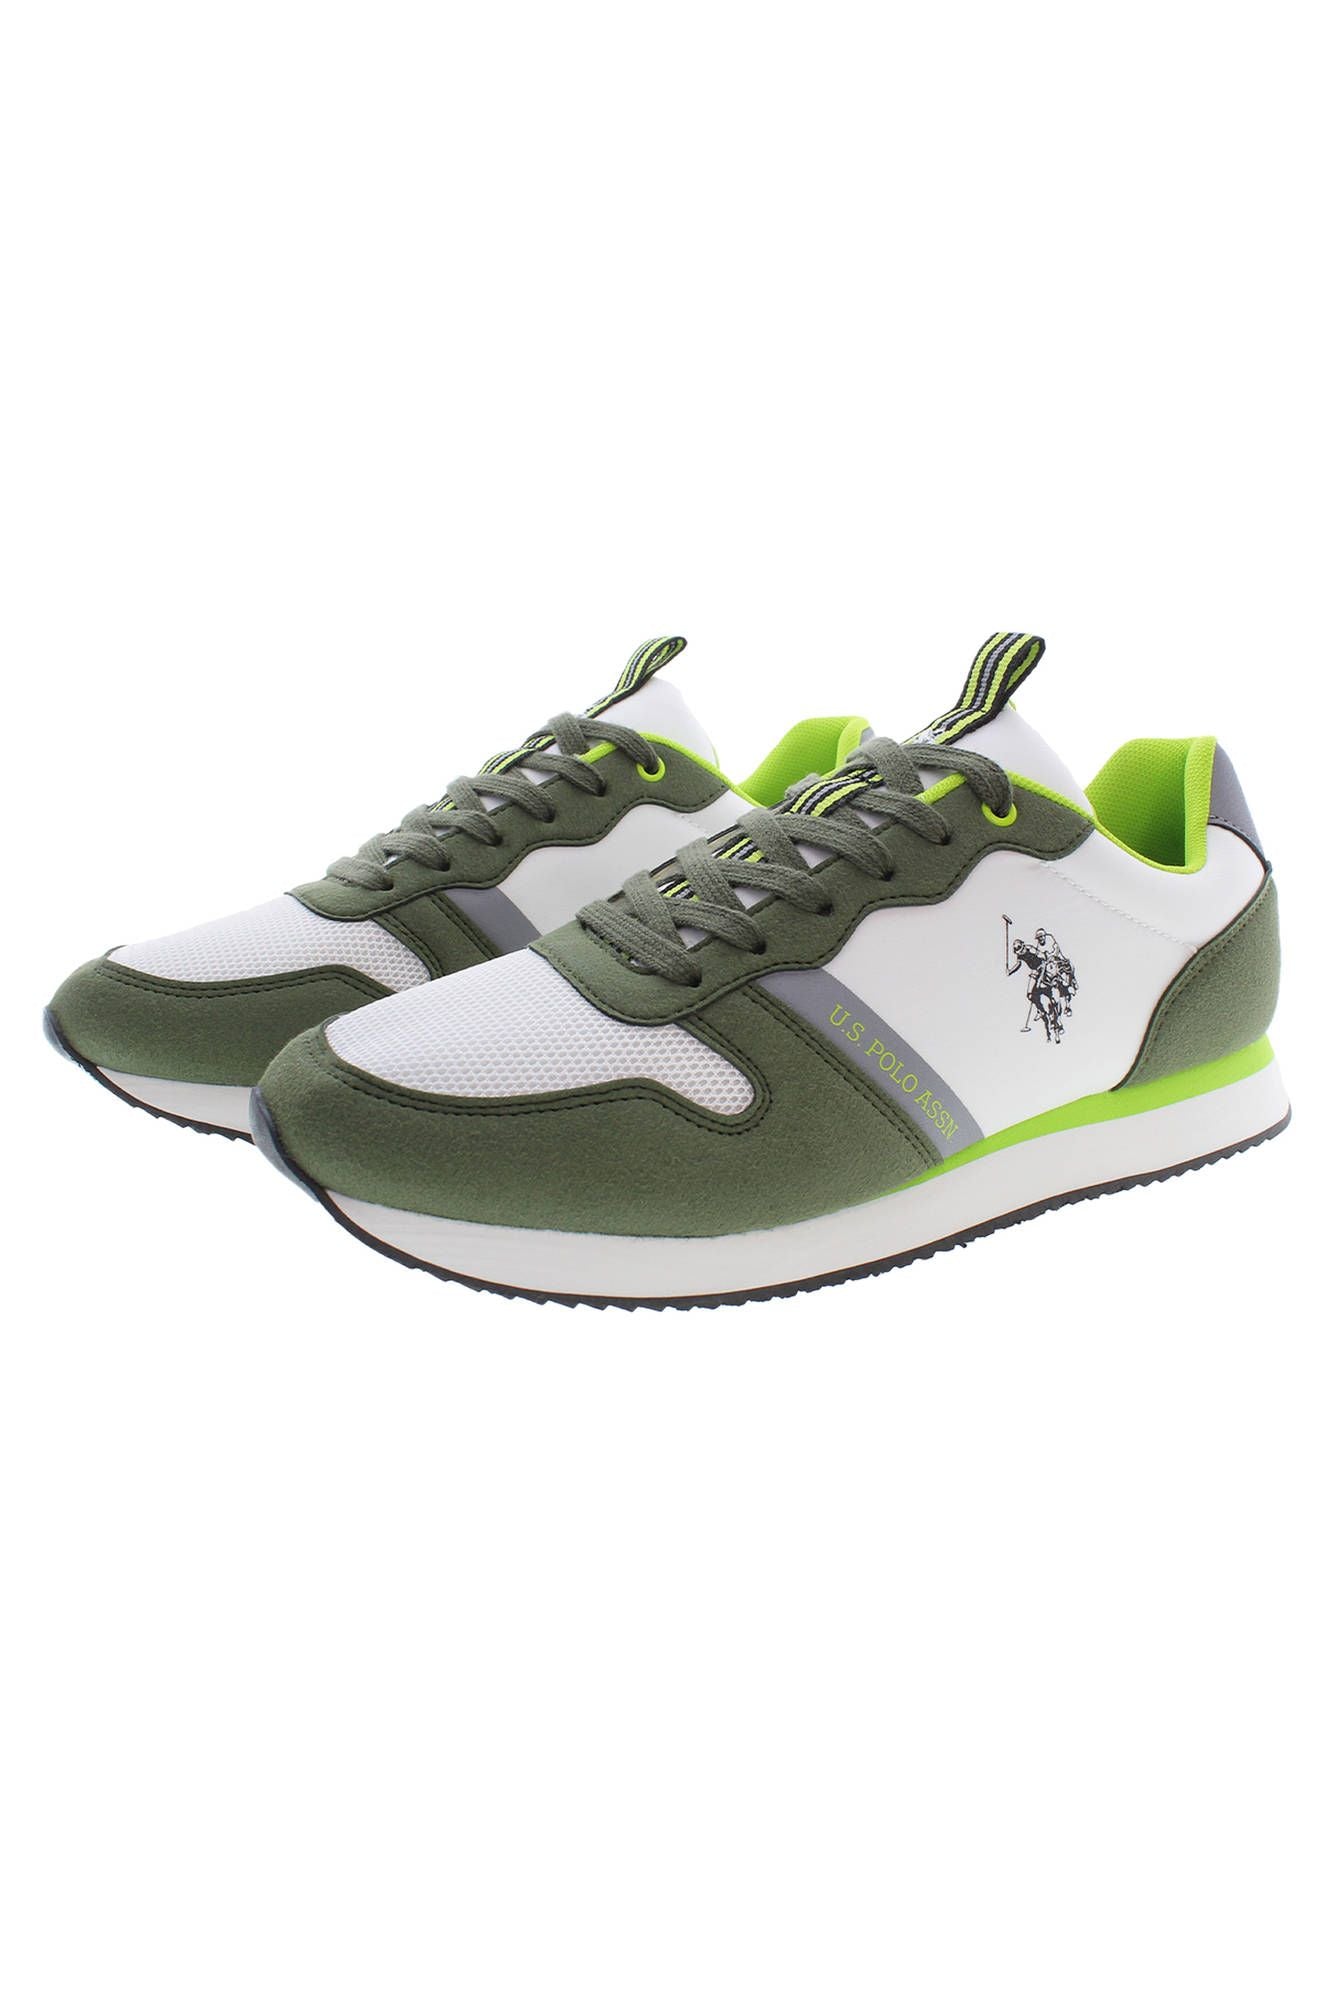 U.S. POLO ASSN. Green Lace-Up Sneakers with Contrasting Details